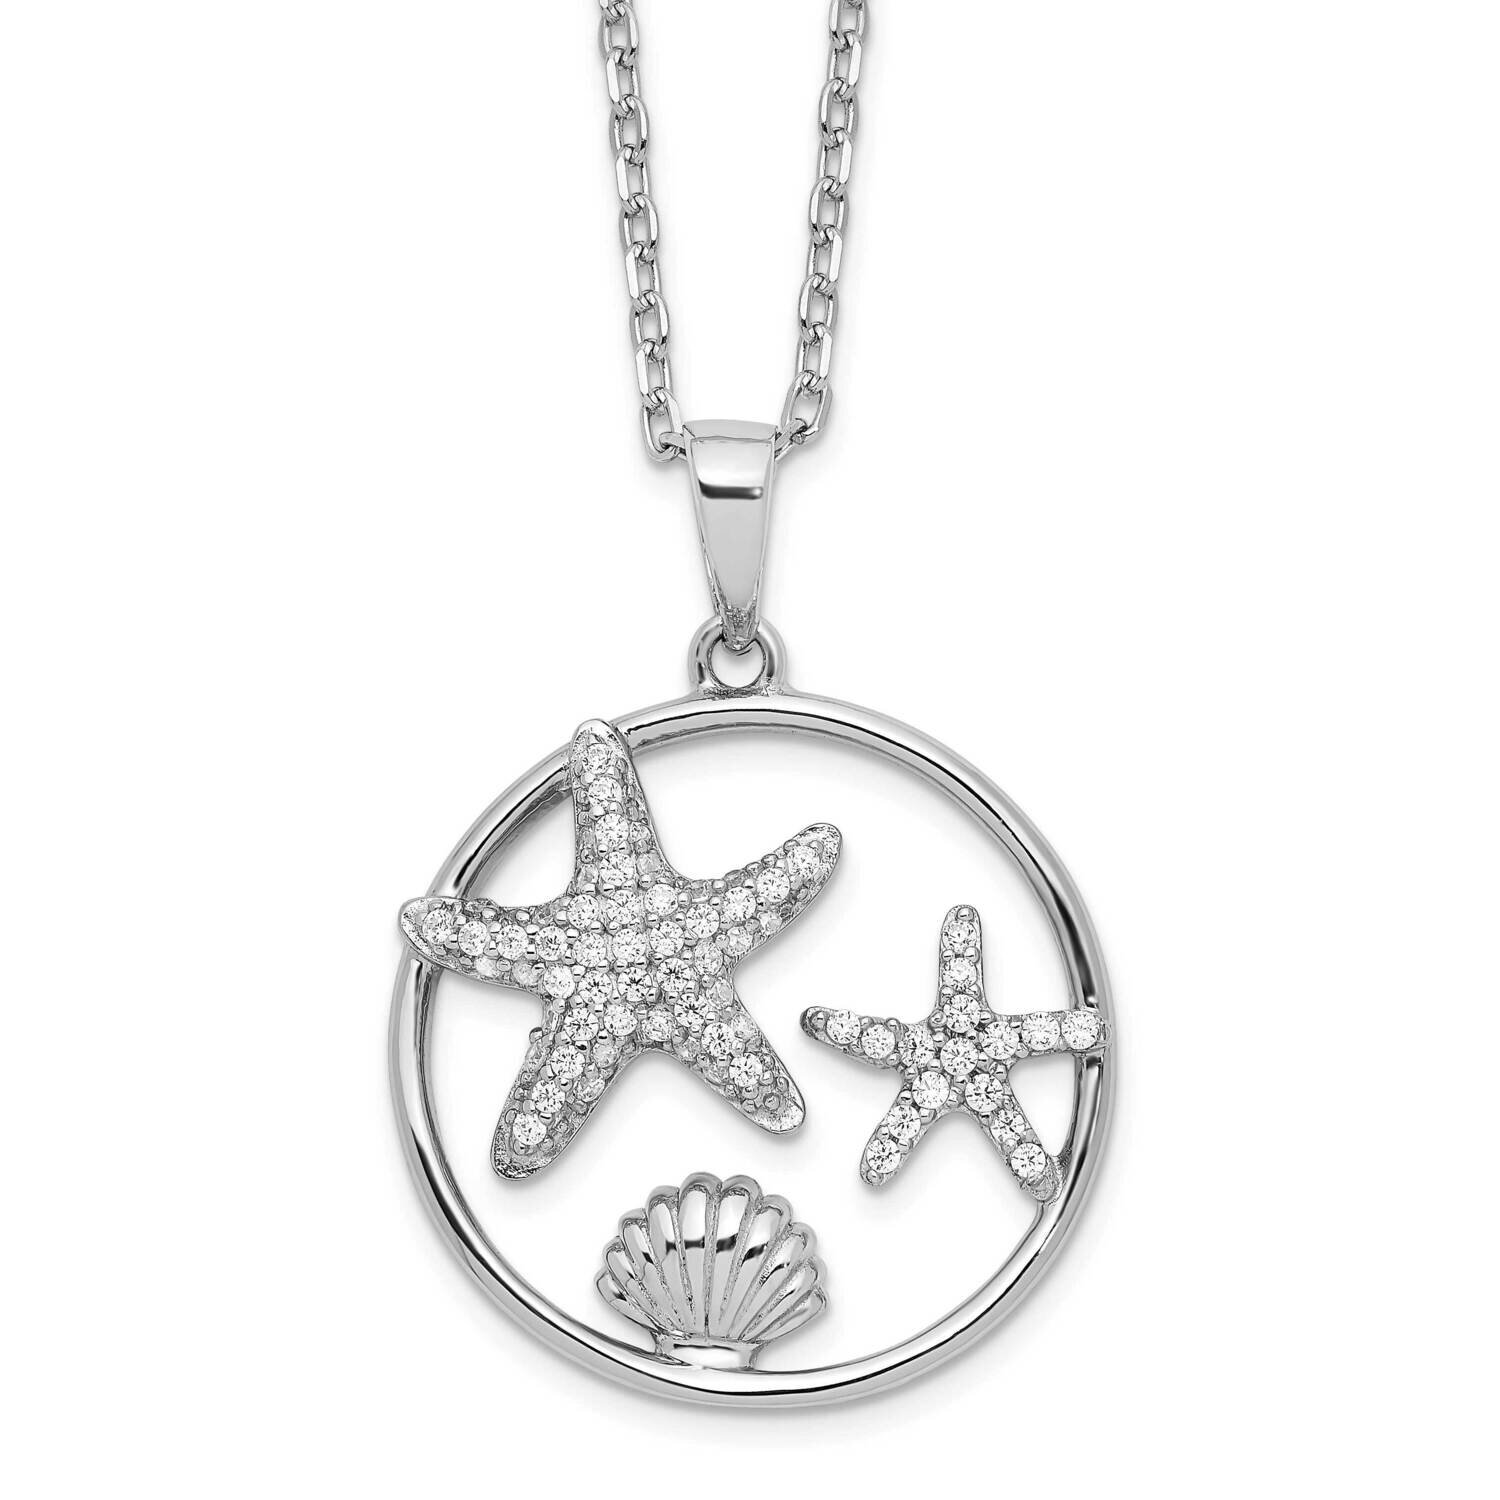 Cheryl M Rhodium-Plated CZ Diamond with 2 Inch Ext. Sea Life Necklace Sterling Silver QCM1545-16